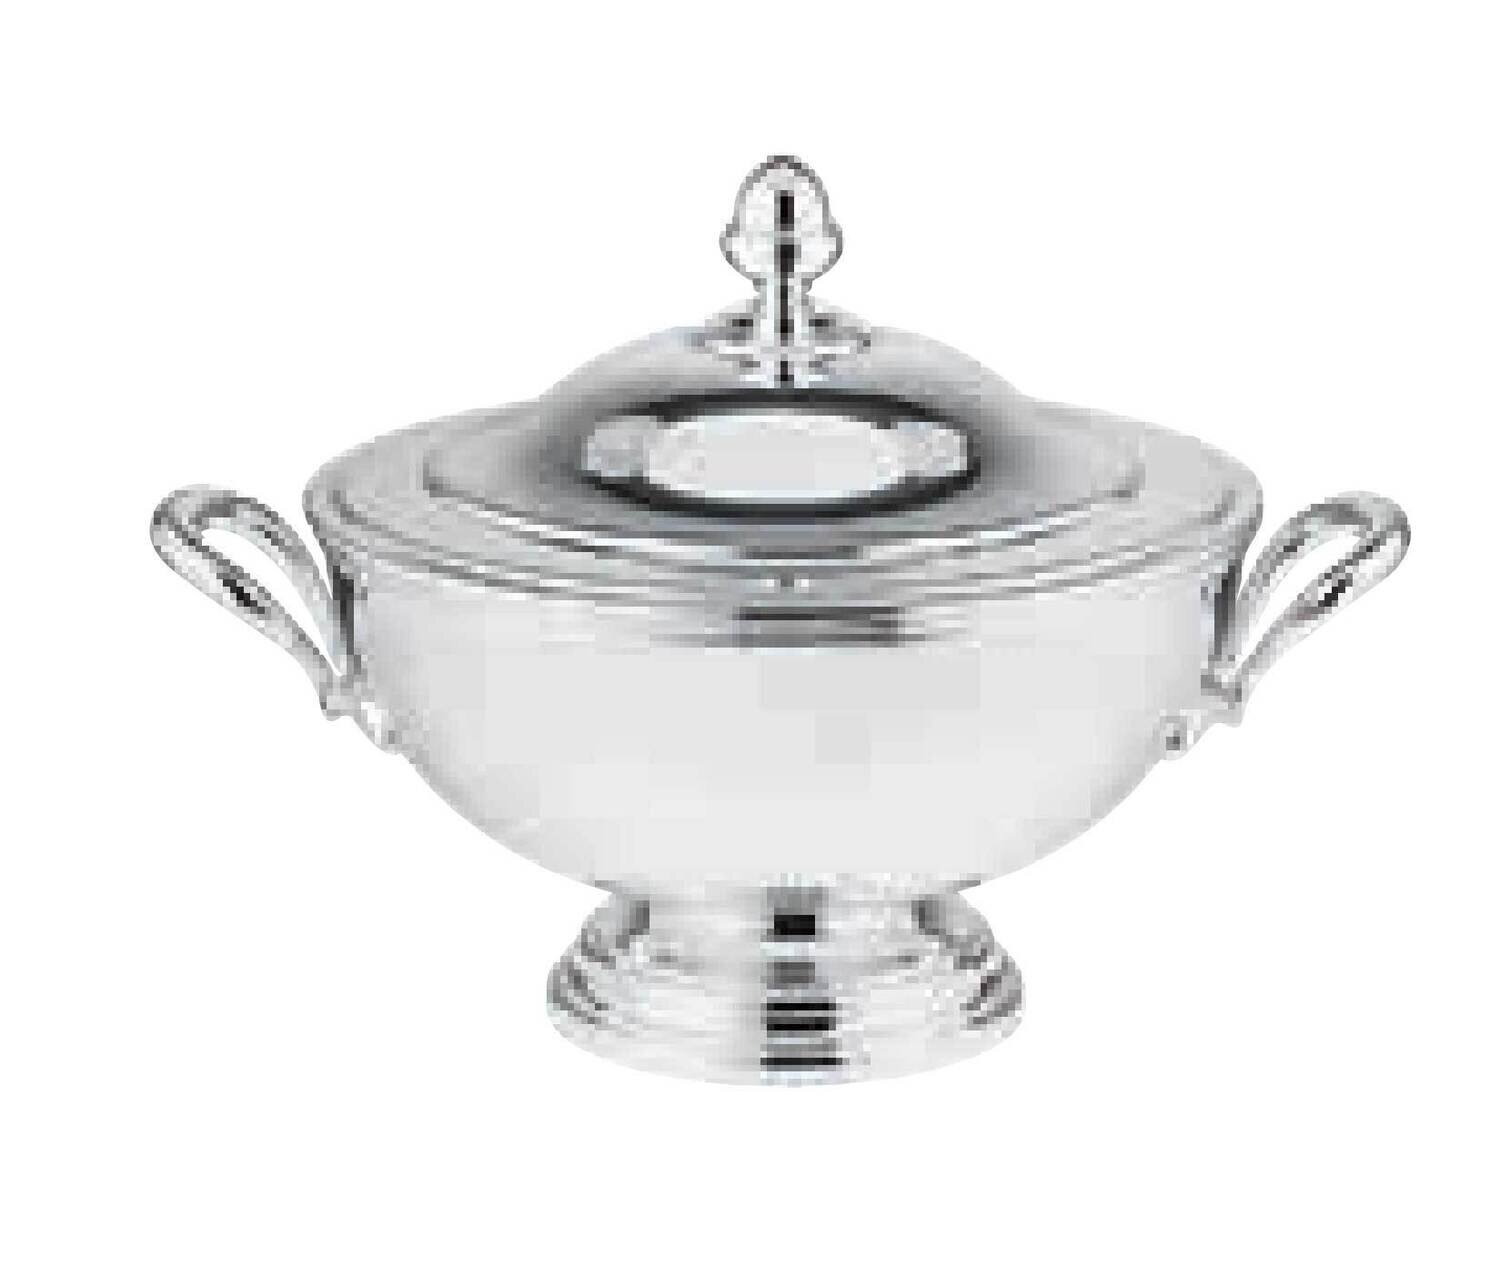 Ercuis Rencontre Soup Tureen 9.5 Inch Silver Plated F522200-24